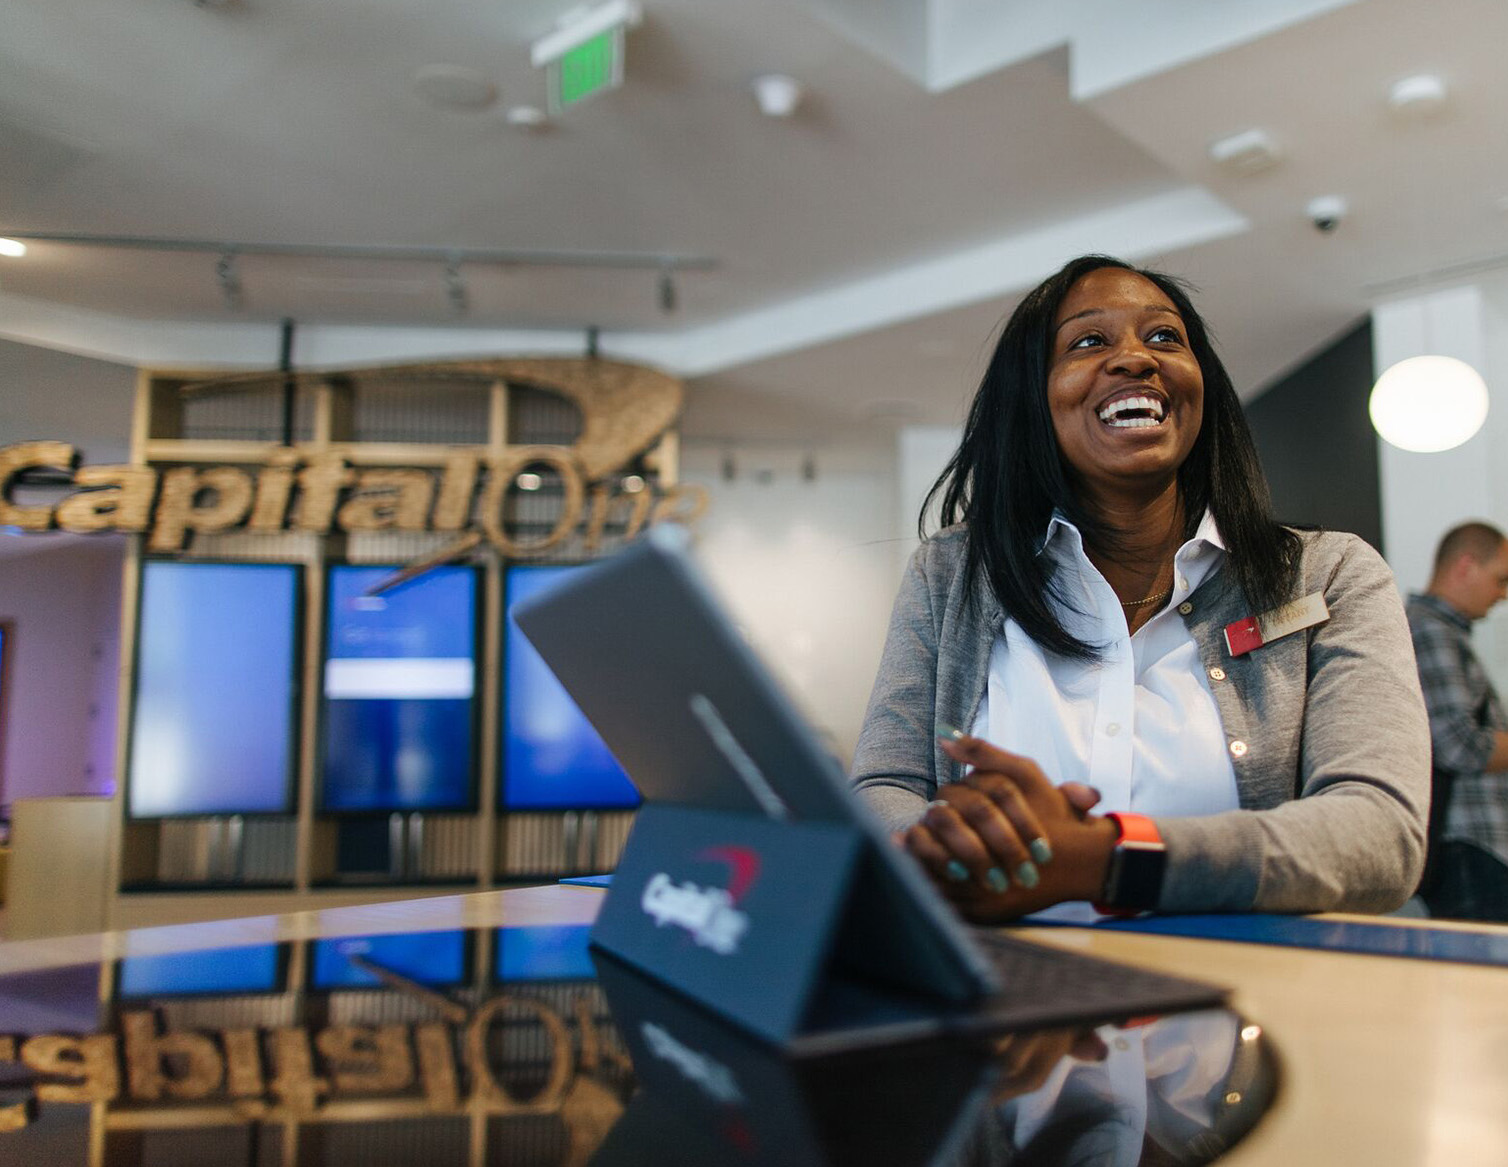 Capital One Cafe Ambassador stands at a cafe table and smiles